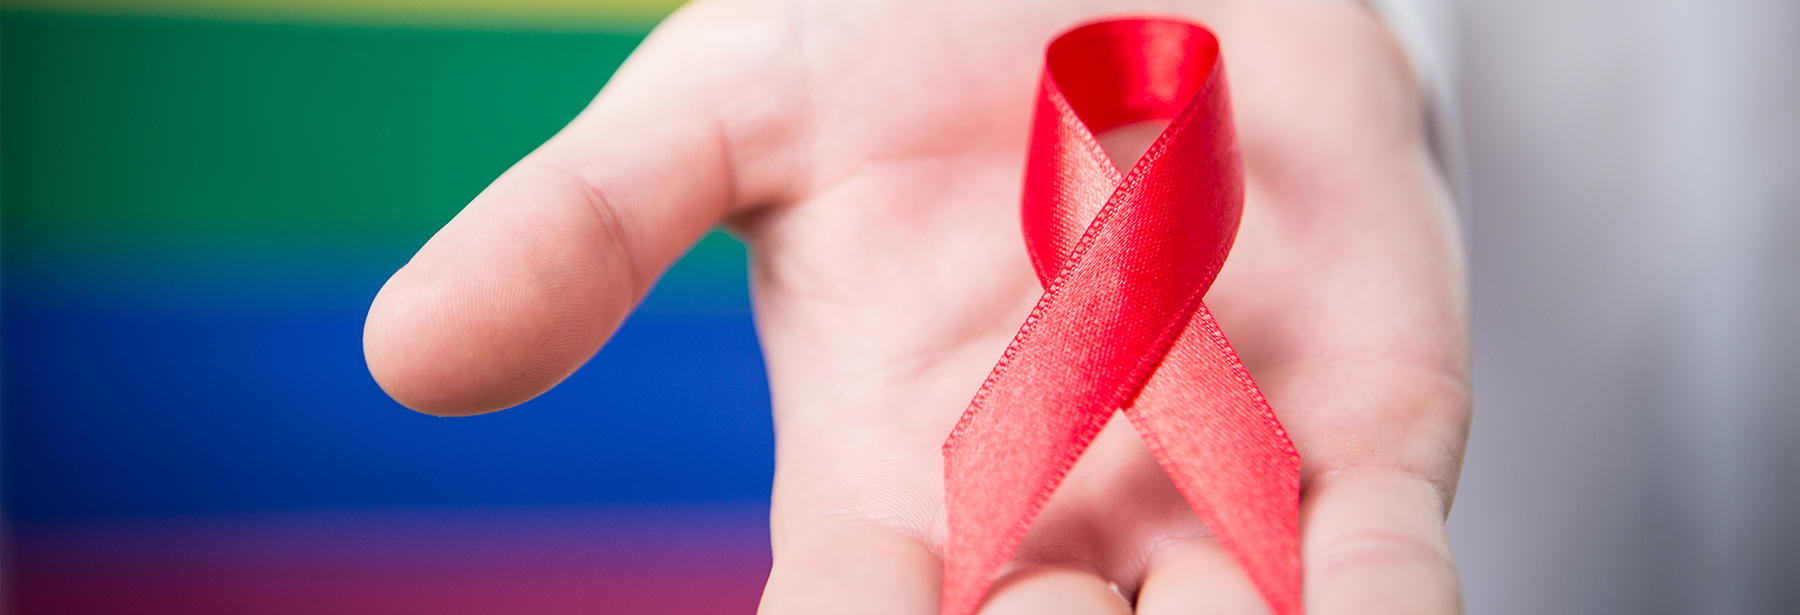 close up image of HIV/AIDS red ribbon on a palm of a hand in front of a rainbow wall